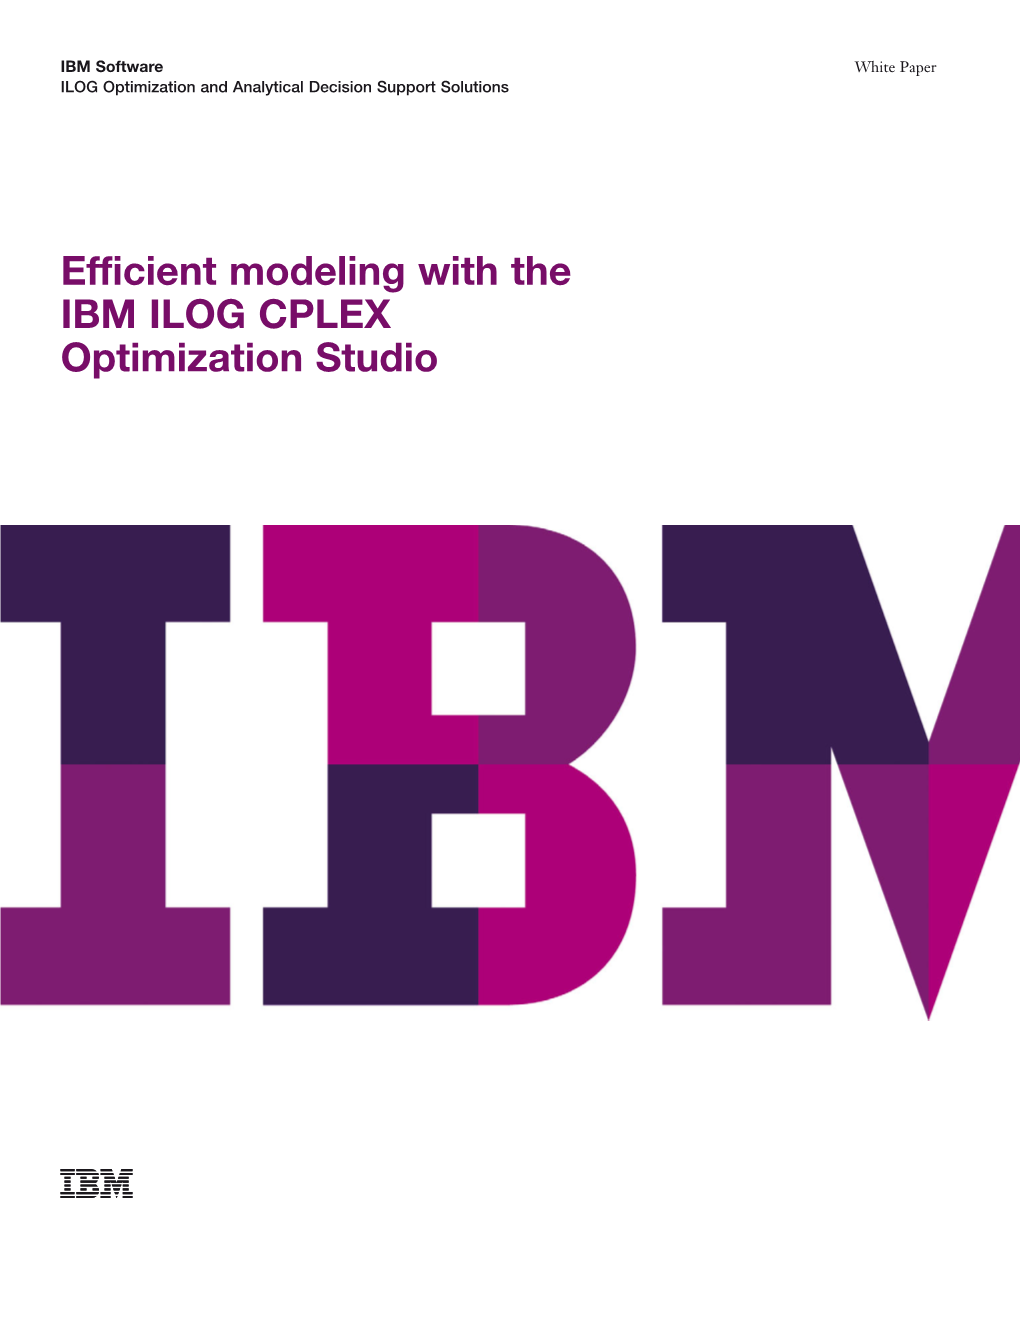 Efficient Modeling with the IBM ILOG CPLEX Optimization Studio 2 Efficient Modeling with the IBM ILOG CPLEX Optimization Studio